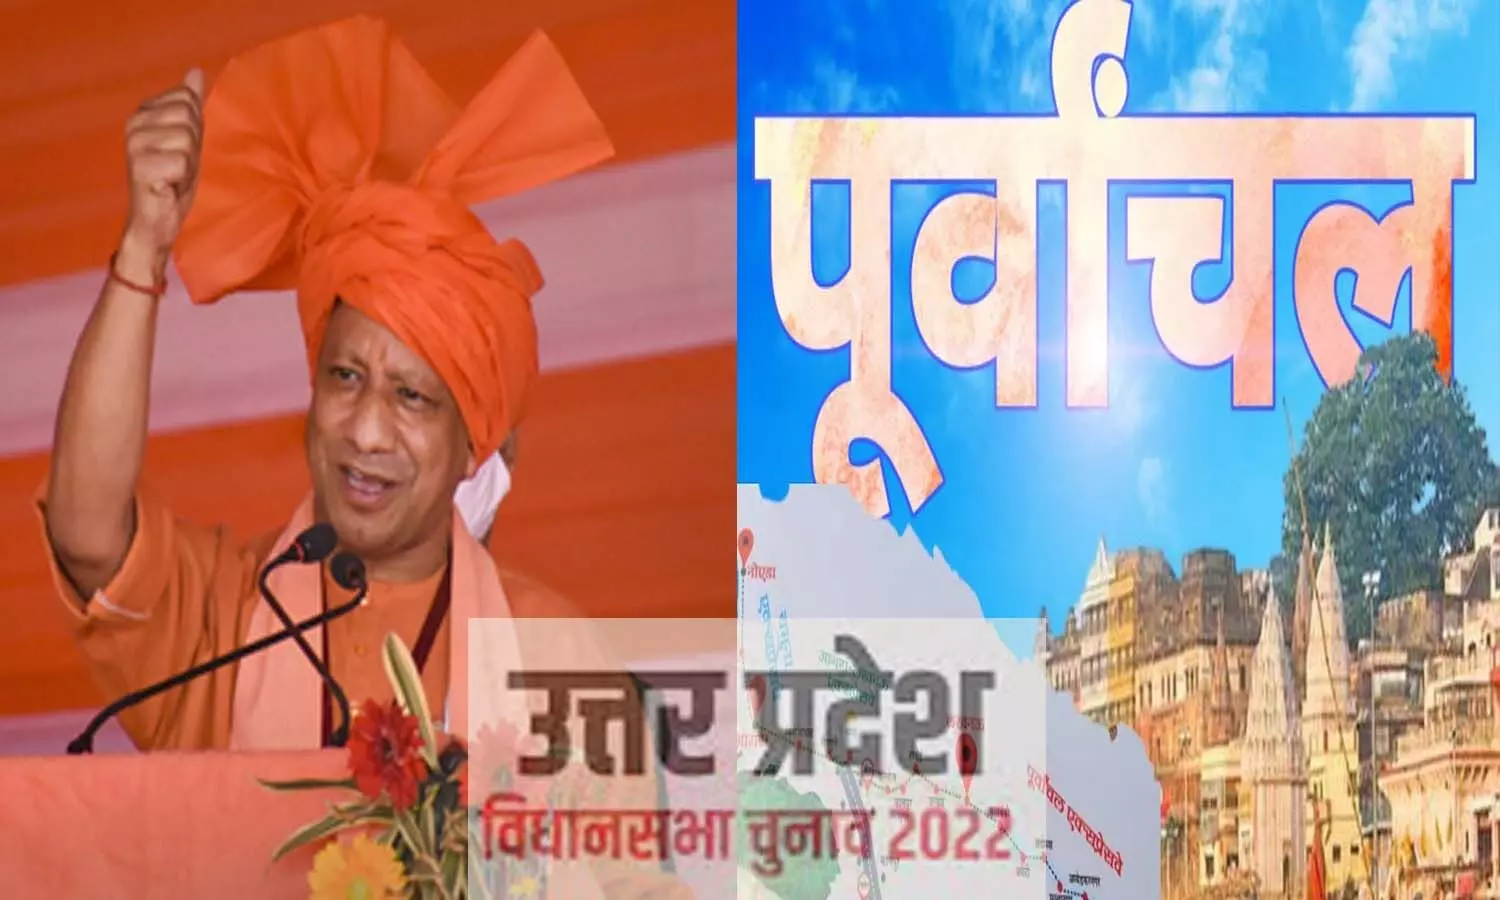 UP Election 2022: Will Yogi Adityanath be able to save his Purvanchal?